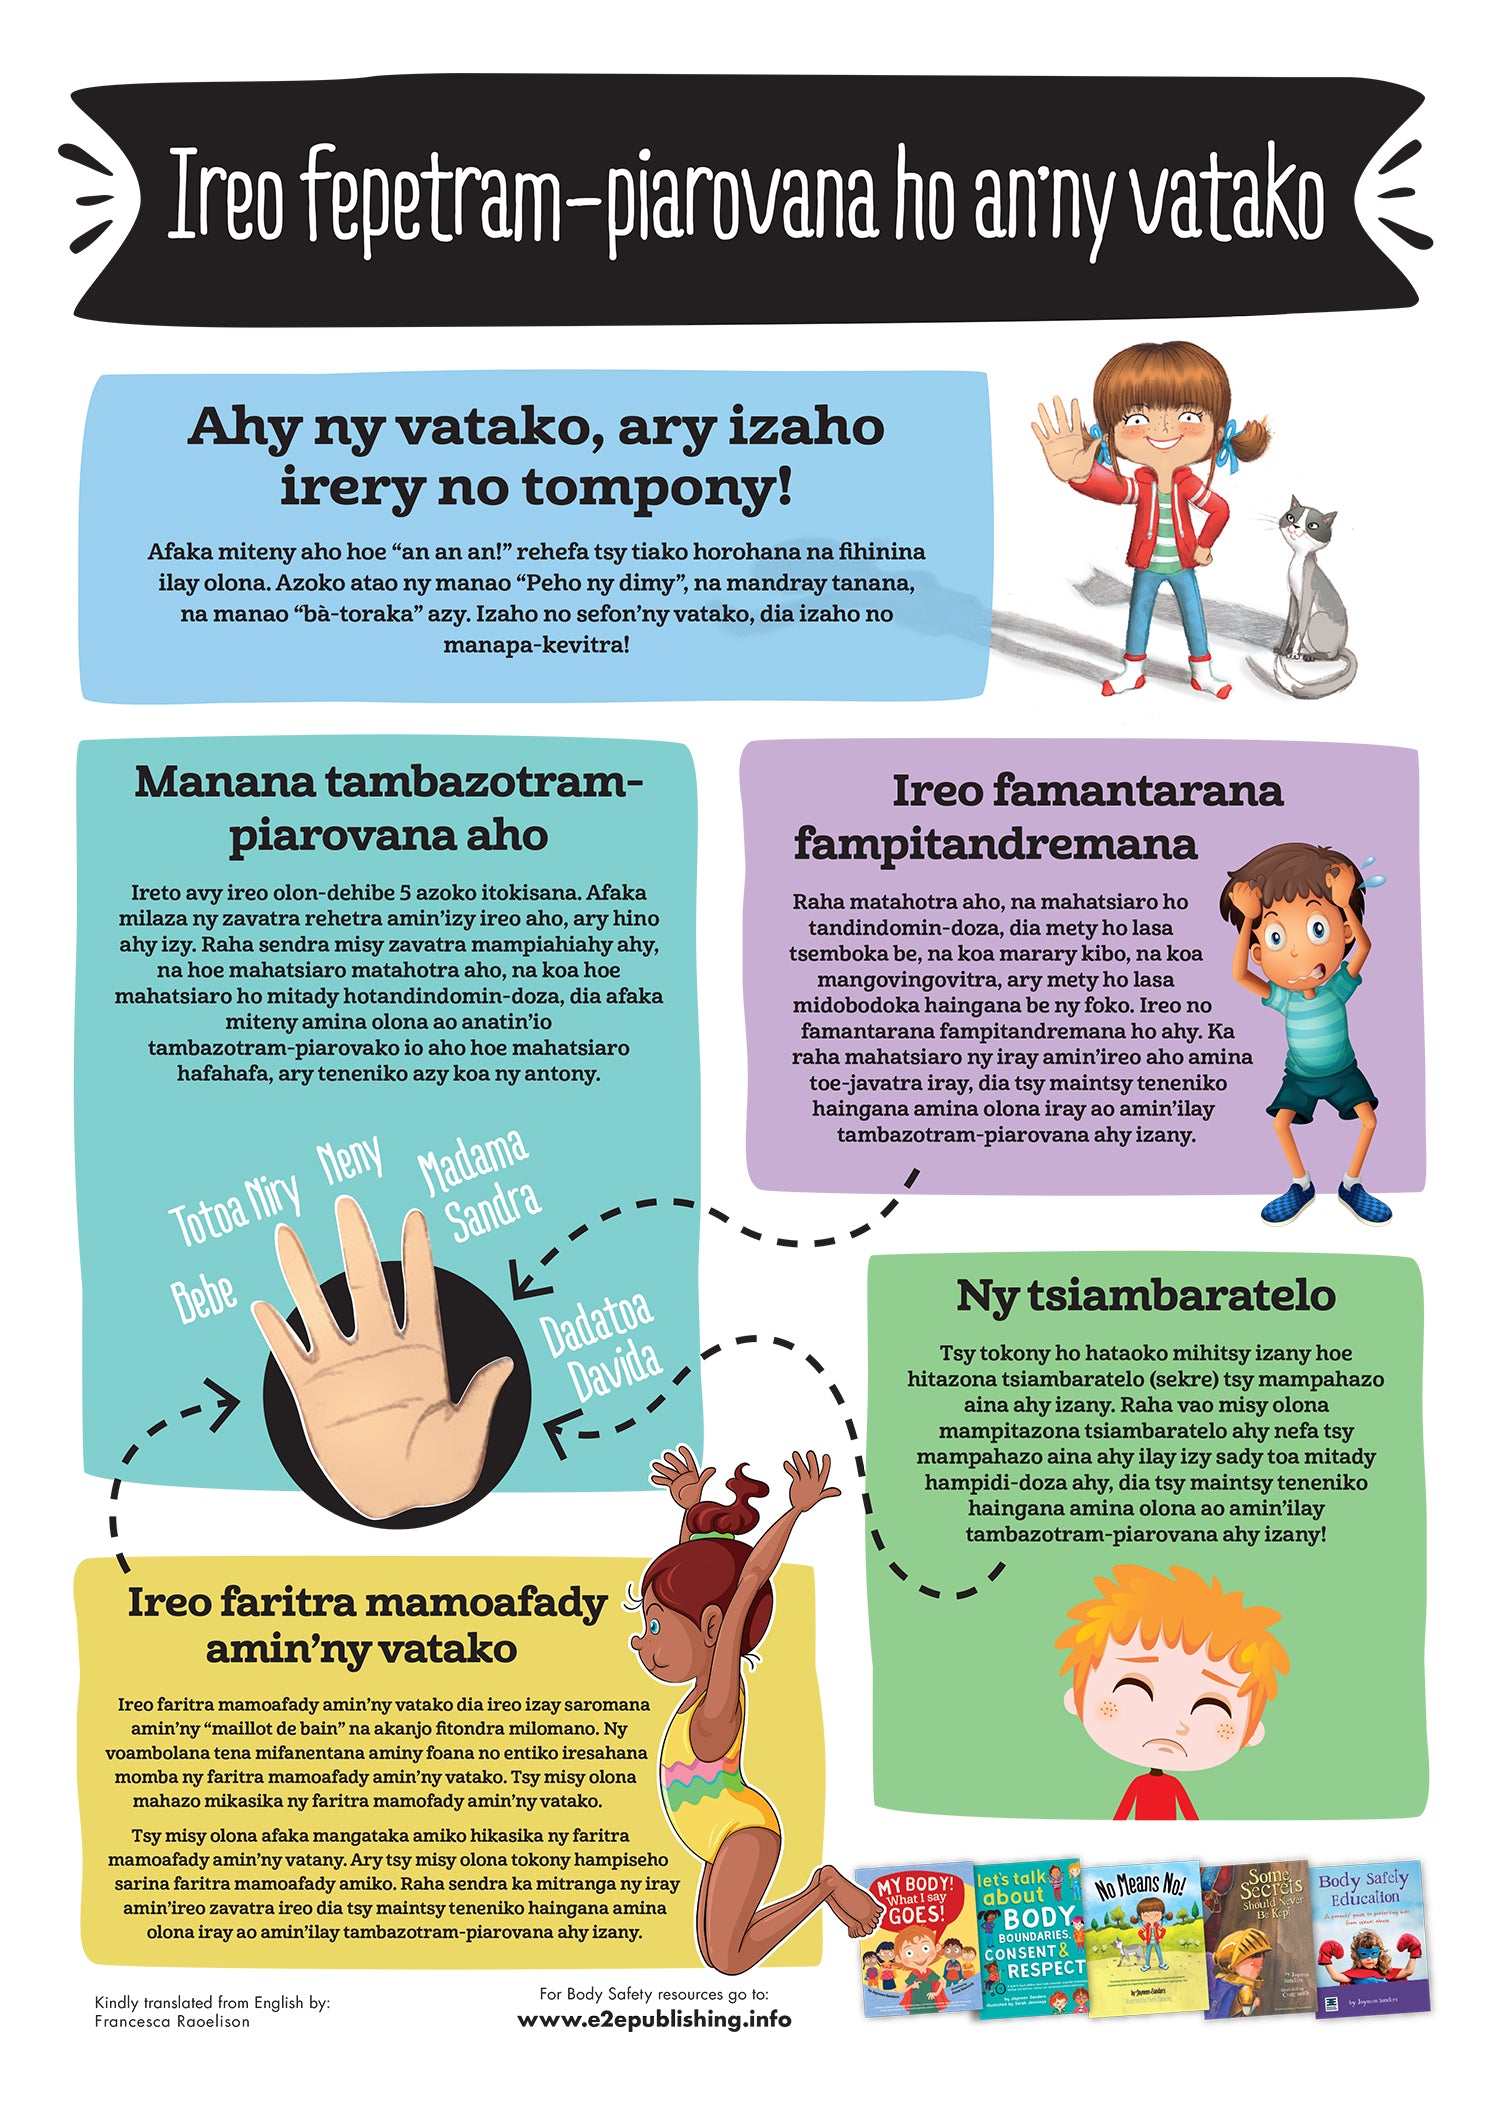 Body Safety Rules poster for children, written in the Malagasy language.